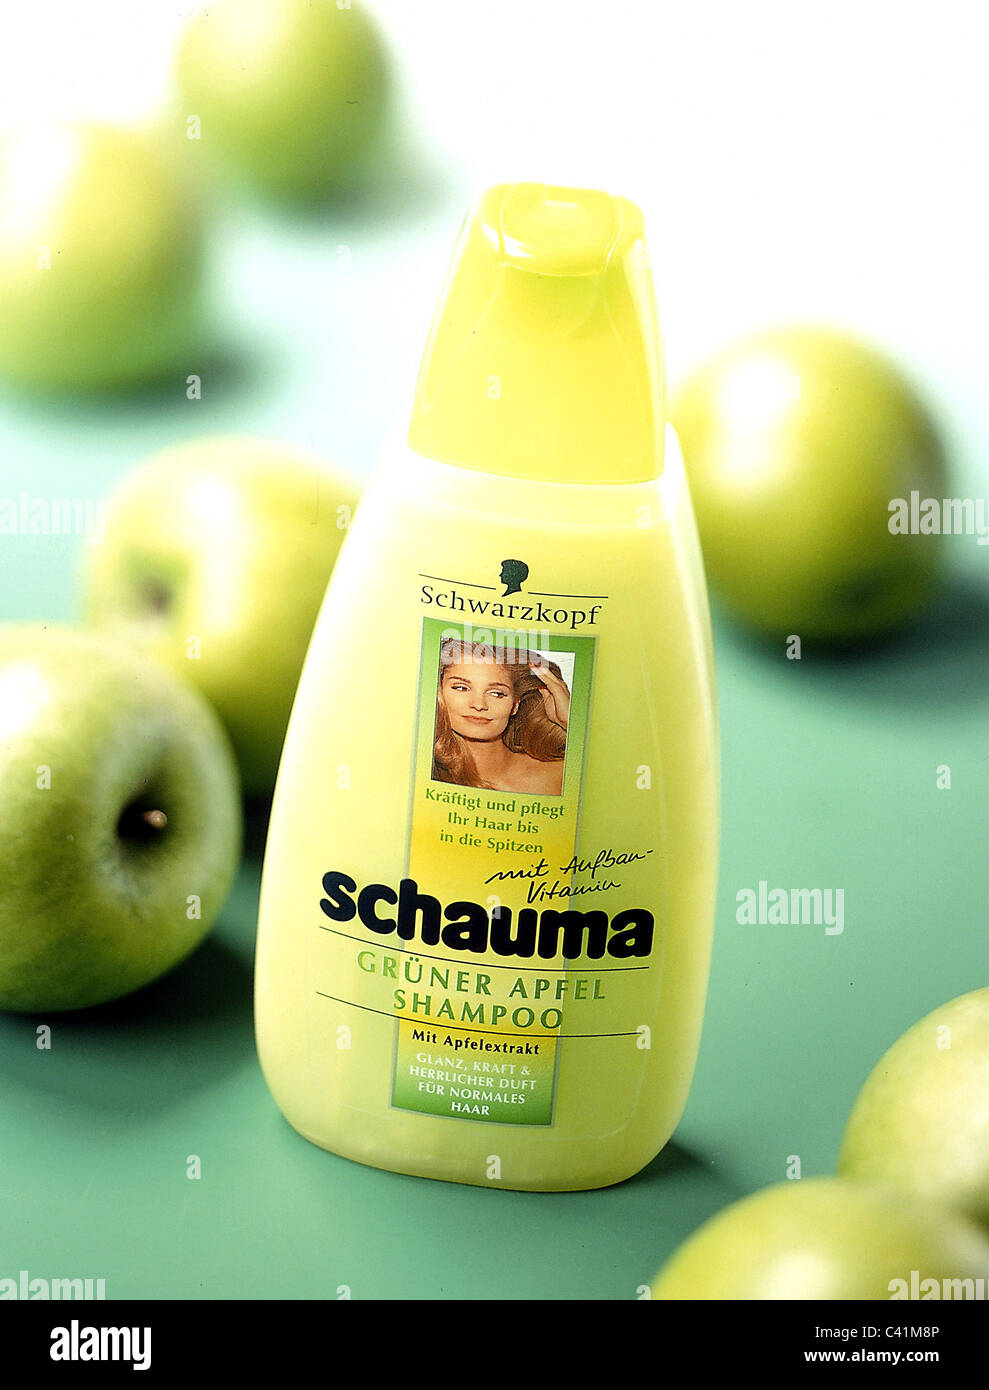 advertising, cosmetics, shampoo, Schwarzkopf, Schauma", "Green Apple",  1999, Additional-Rights-Clearences-Not Available Stock Photo - Alamy